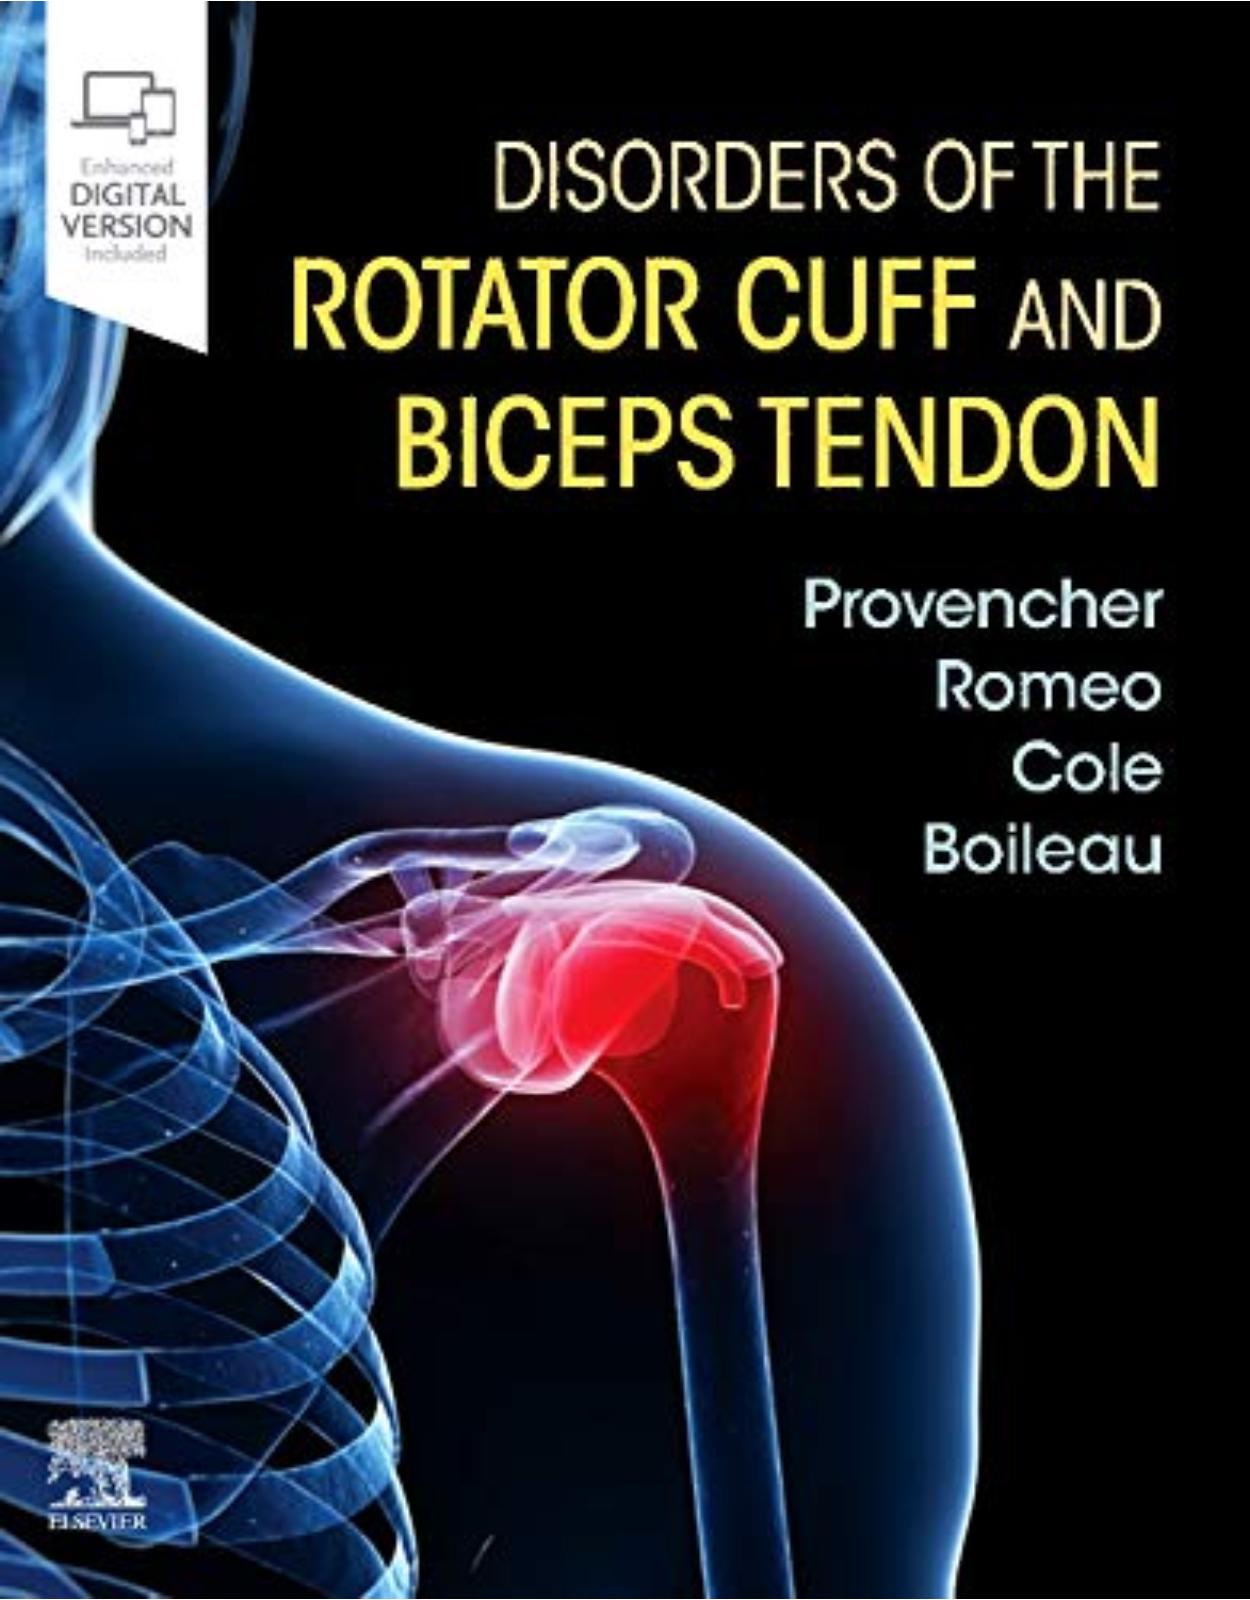 Disorders of the Rotator Cuff and Biceps Tendon: The Surgeon's Guide to Comprehensive Management, 1e 